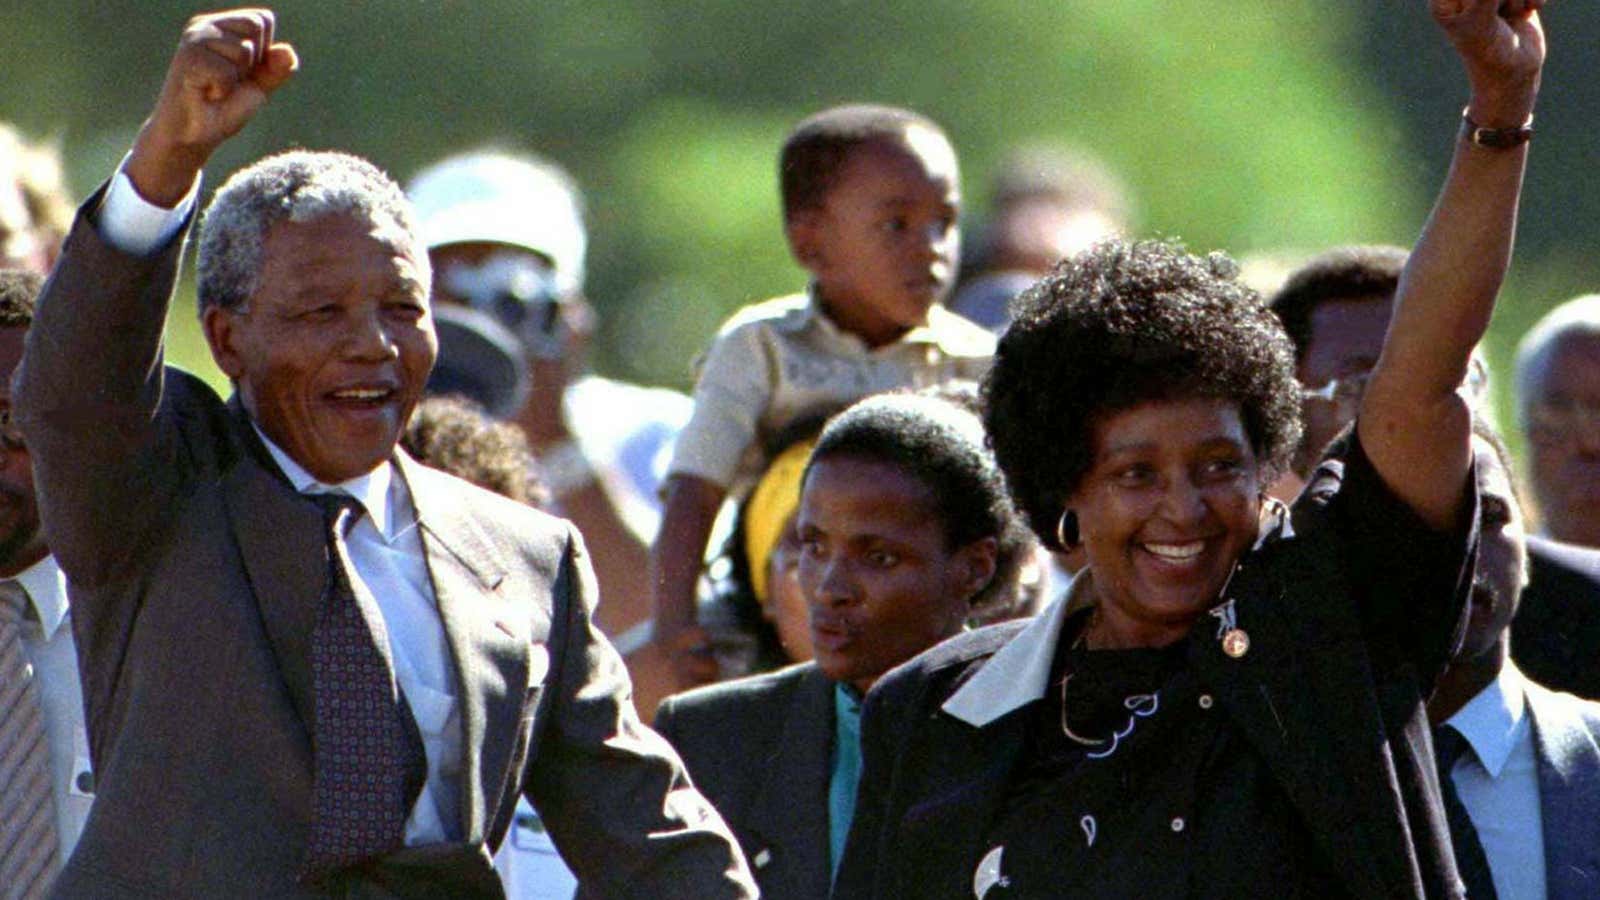 Nelson Mandela with his ex-wife, Winnie Mandela, after his release from prison in 1990